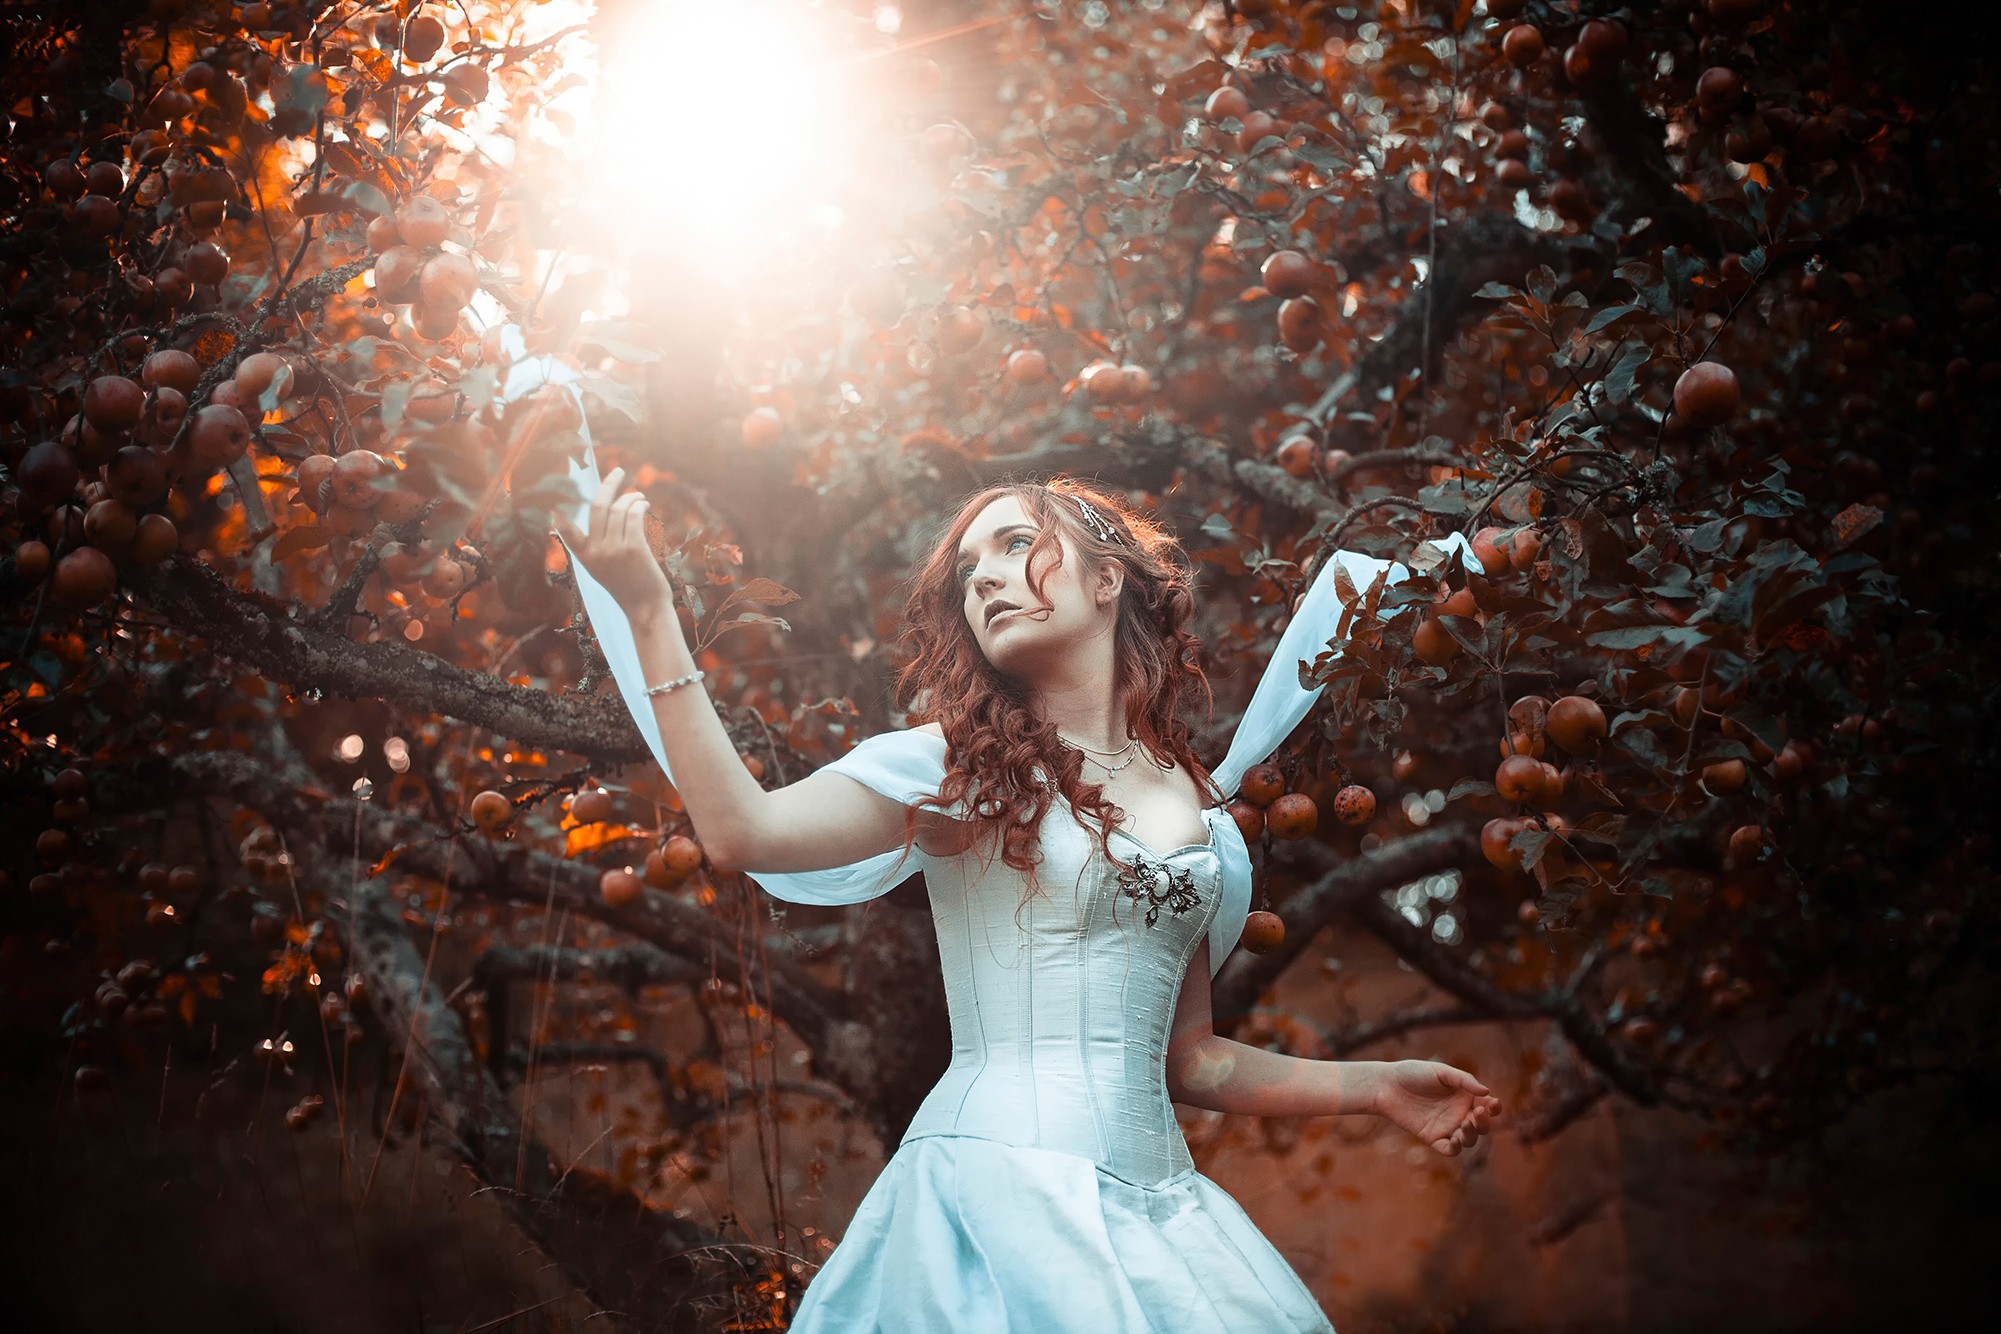 People 2001x1334 women corset white women outdoors fantasy girl outdoors trees plants looking up dress redhead